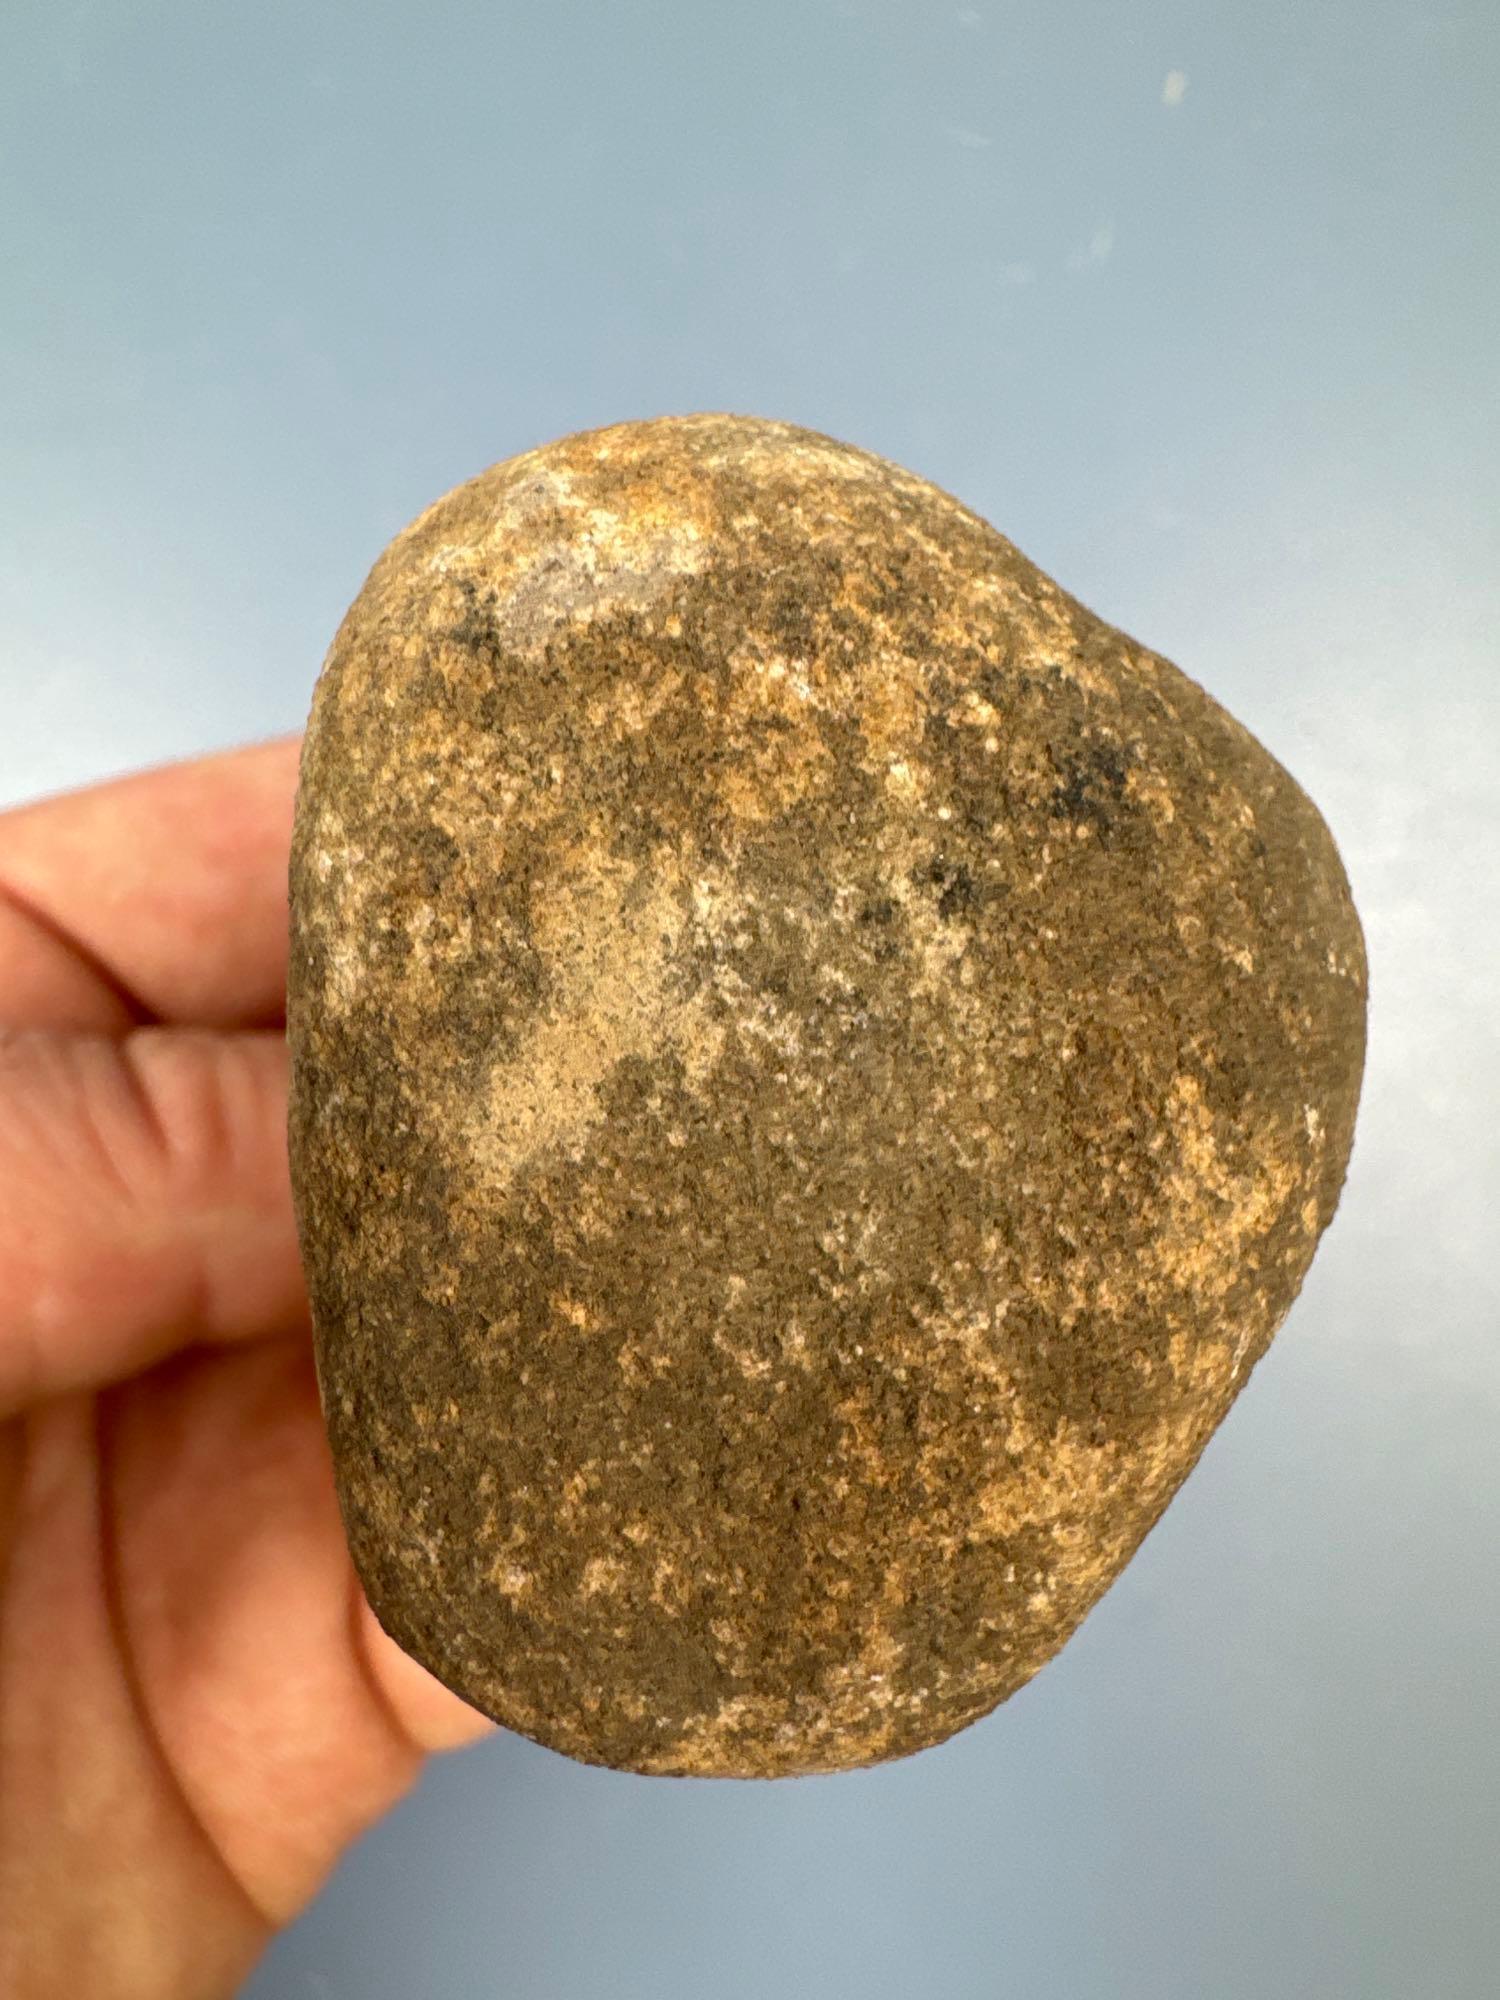 2 7/8" Grooved Hammerstone, 3/4, Found in New Jersey